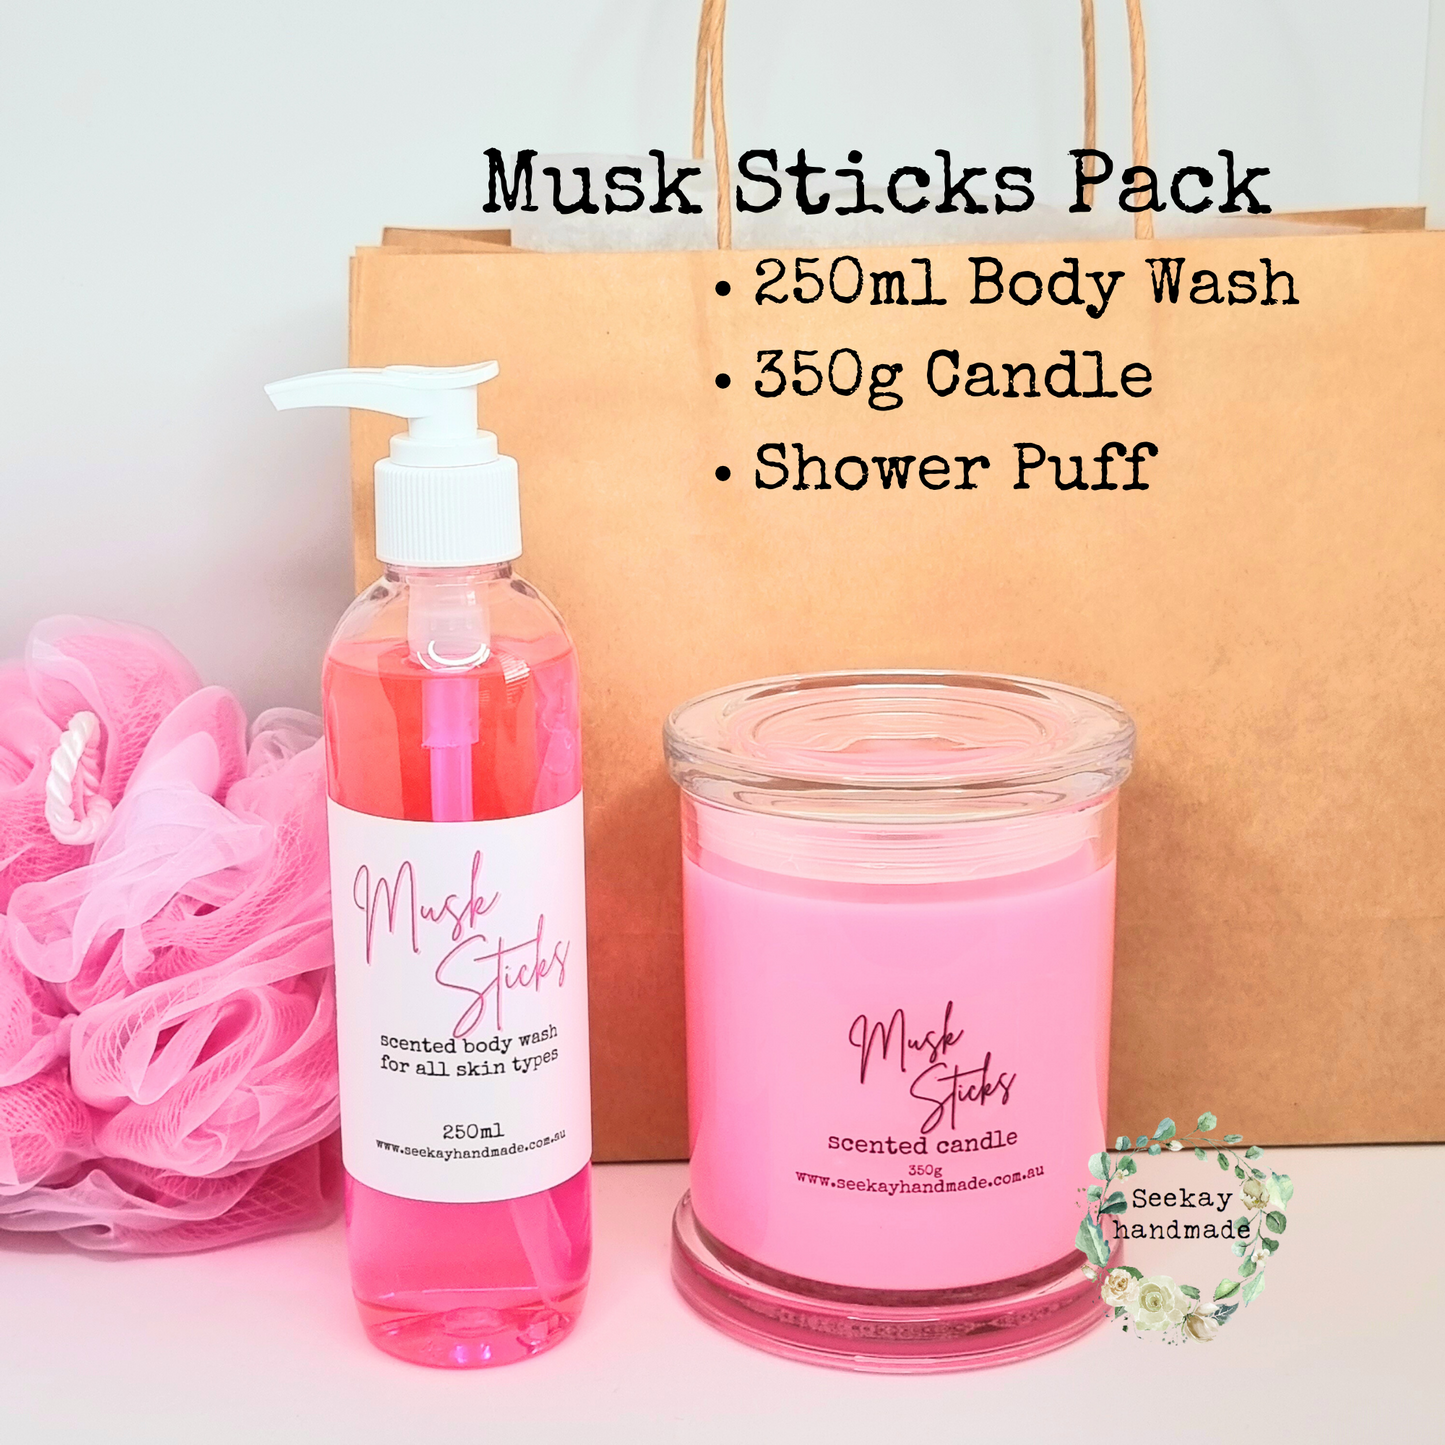 Musk Sticks Pack with Candle, scented body wash, gift idea, pamper pack